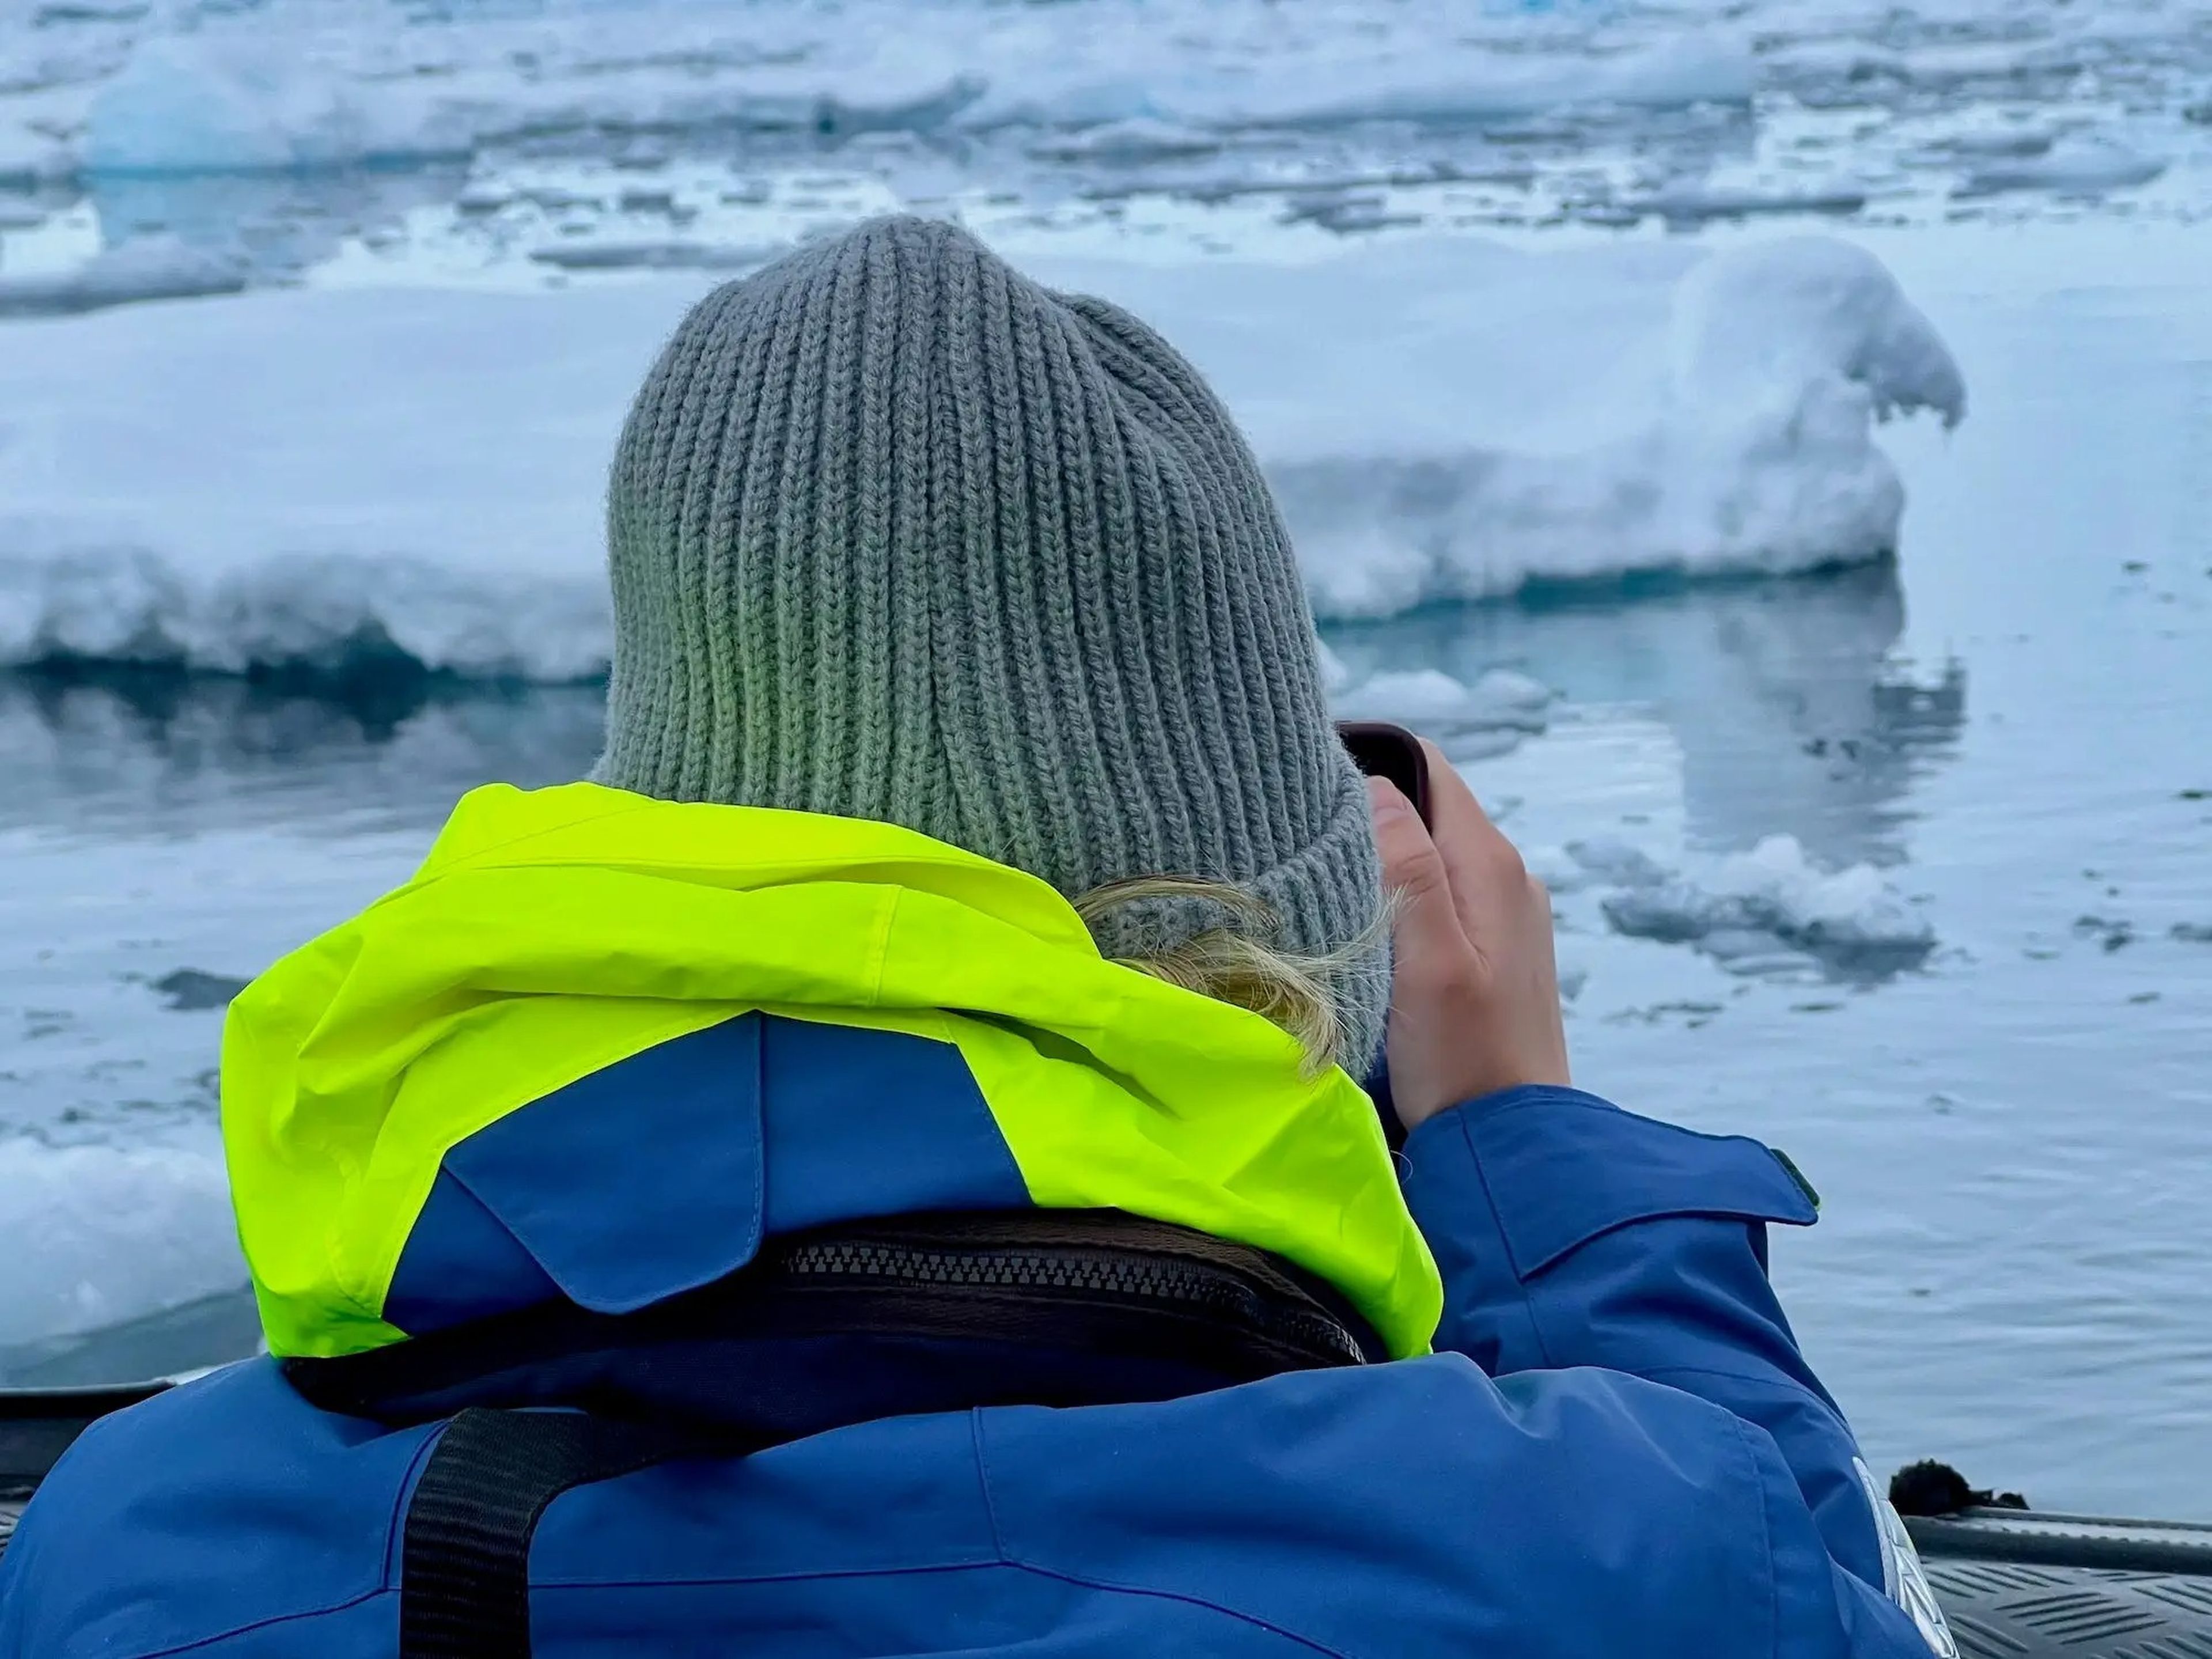 One of my friends taking pictures of Antarctica from a zodiac.